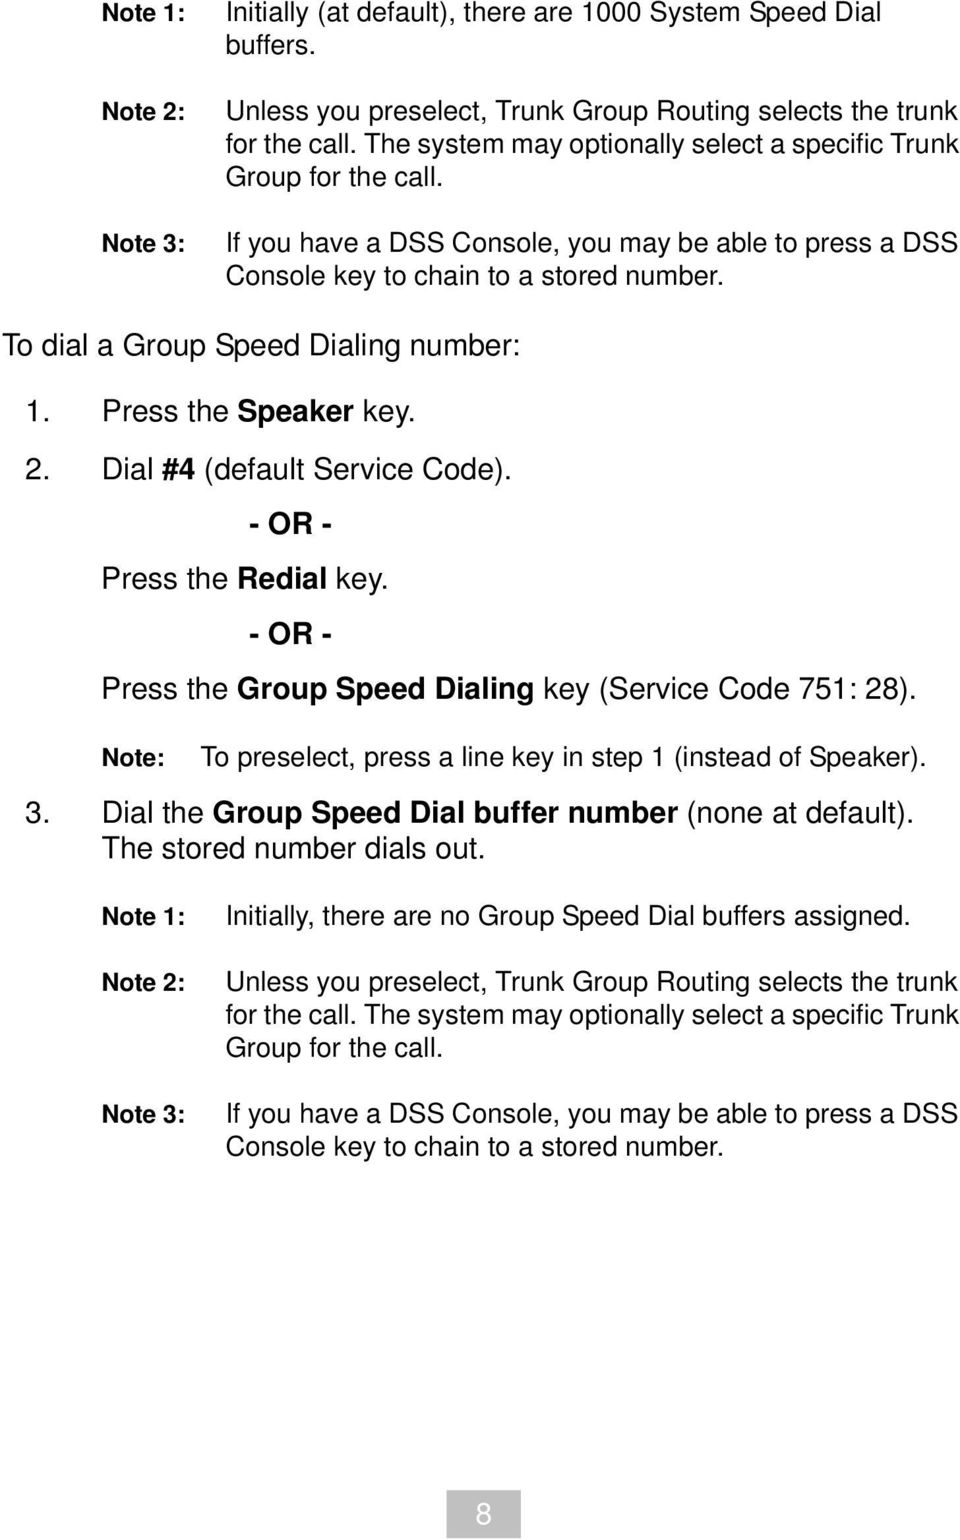 To dial a Group Speed Dialing number: 1. Press the Speaker key. 2. Dial #4 (default Service Code). Press the Redial key. Press the Group Speed Dialing key (Service Code 751: 28).